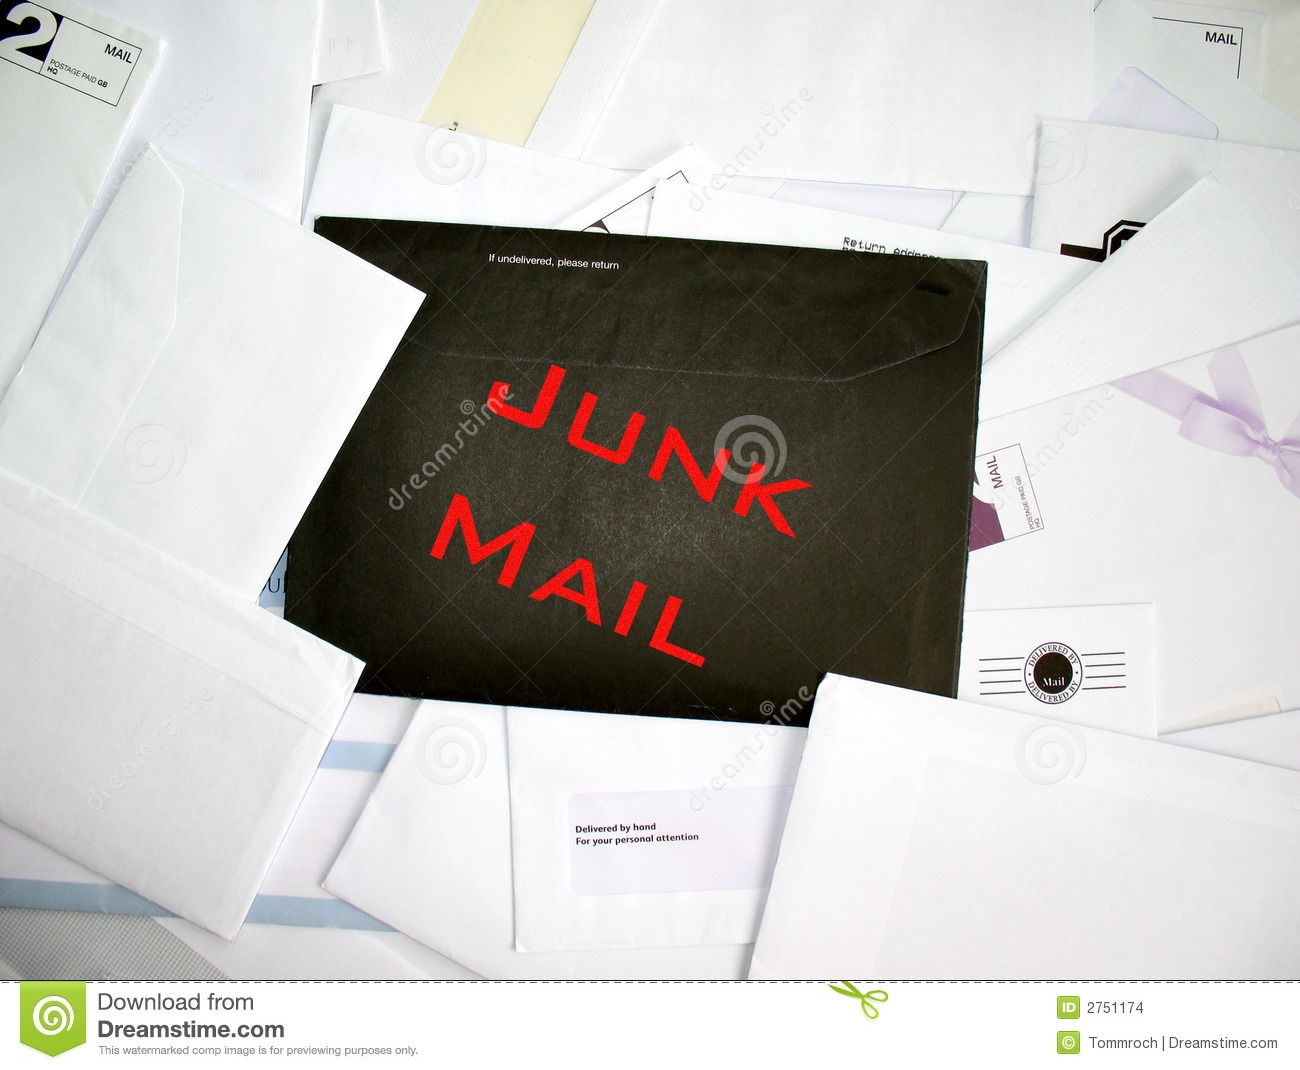 Pile Of Unsolicited Mail With Black Envelope Stating Junk Mail 